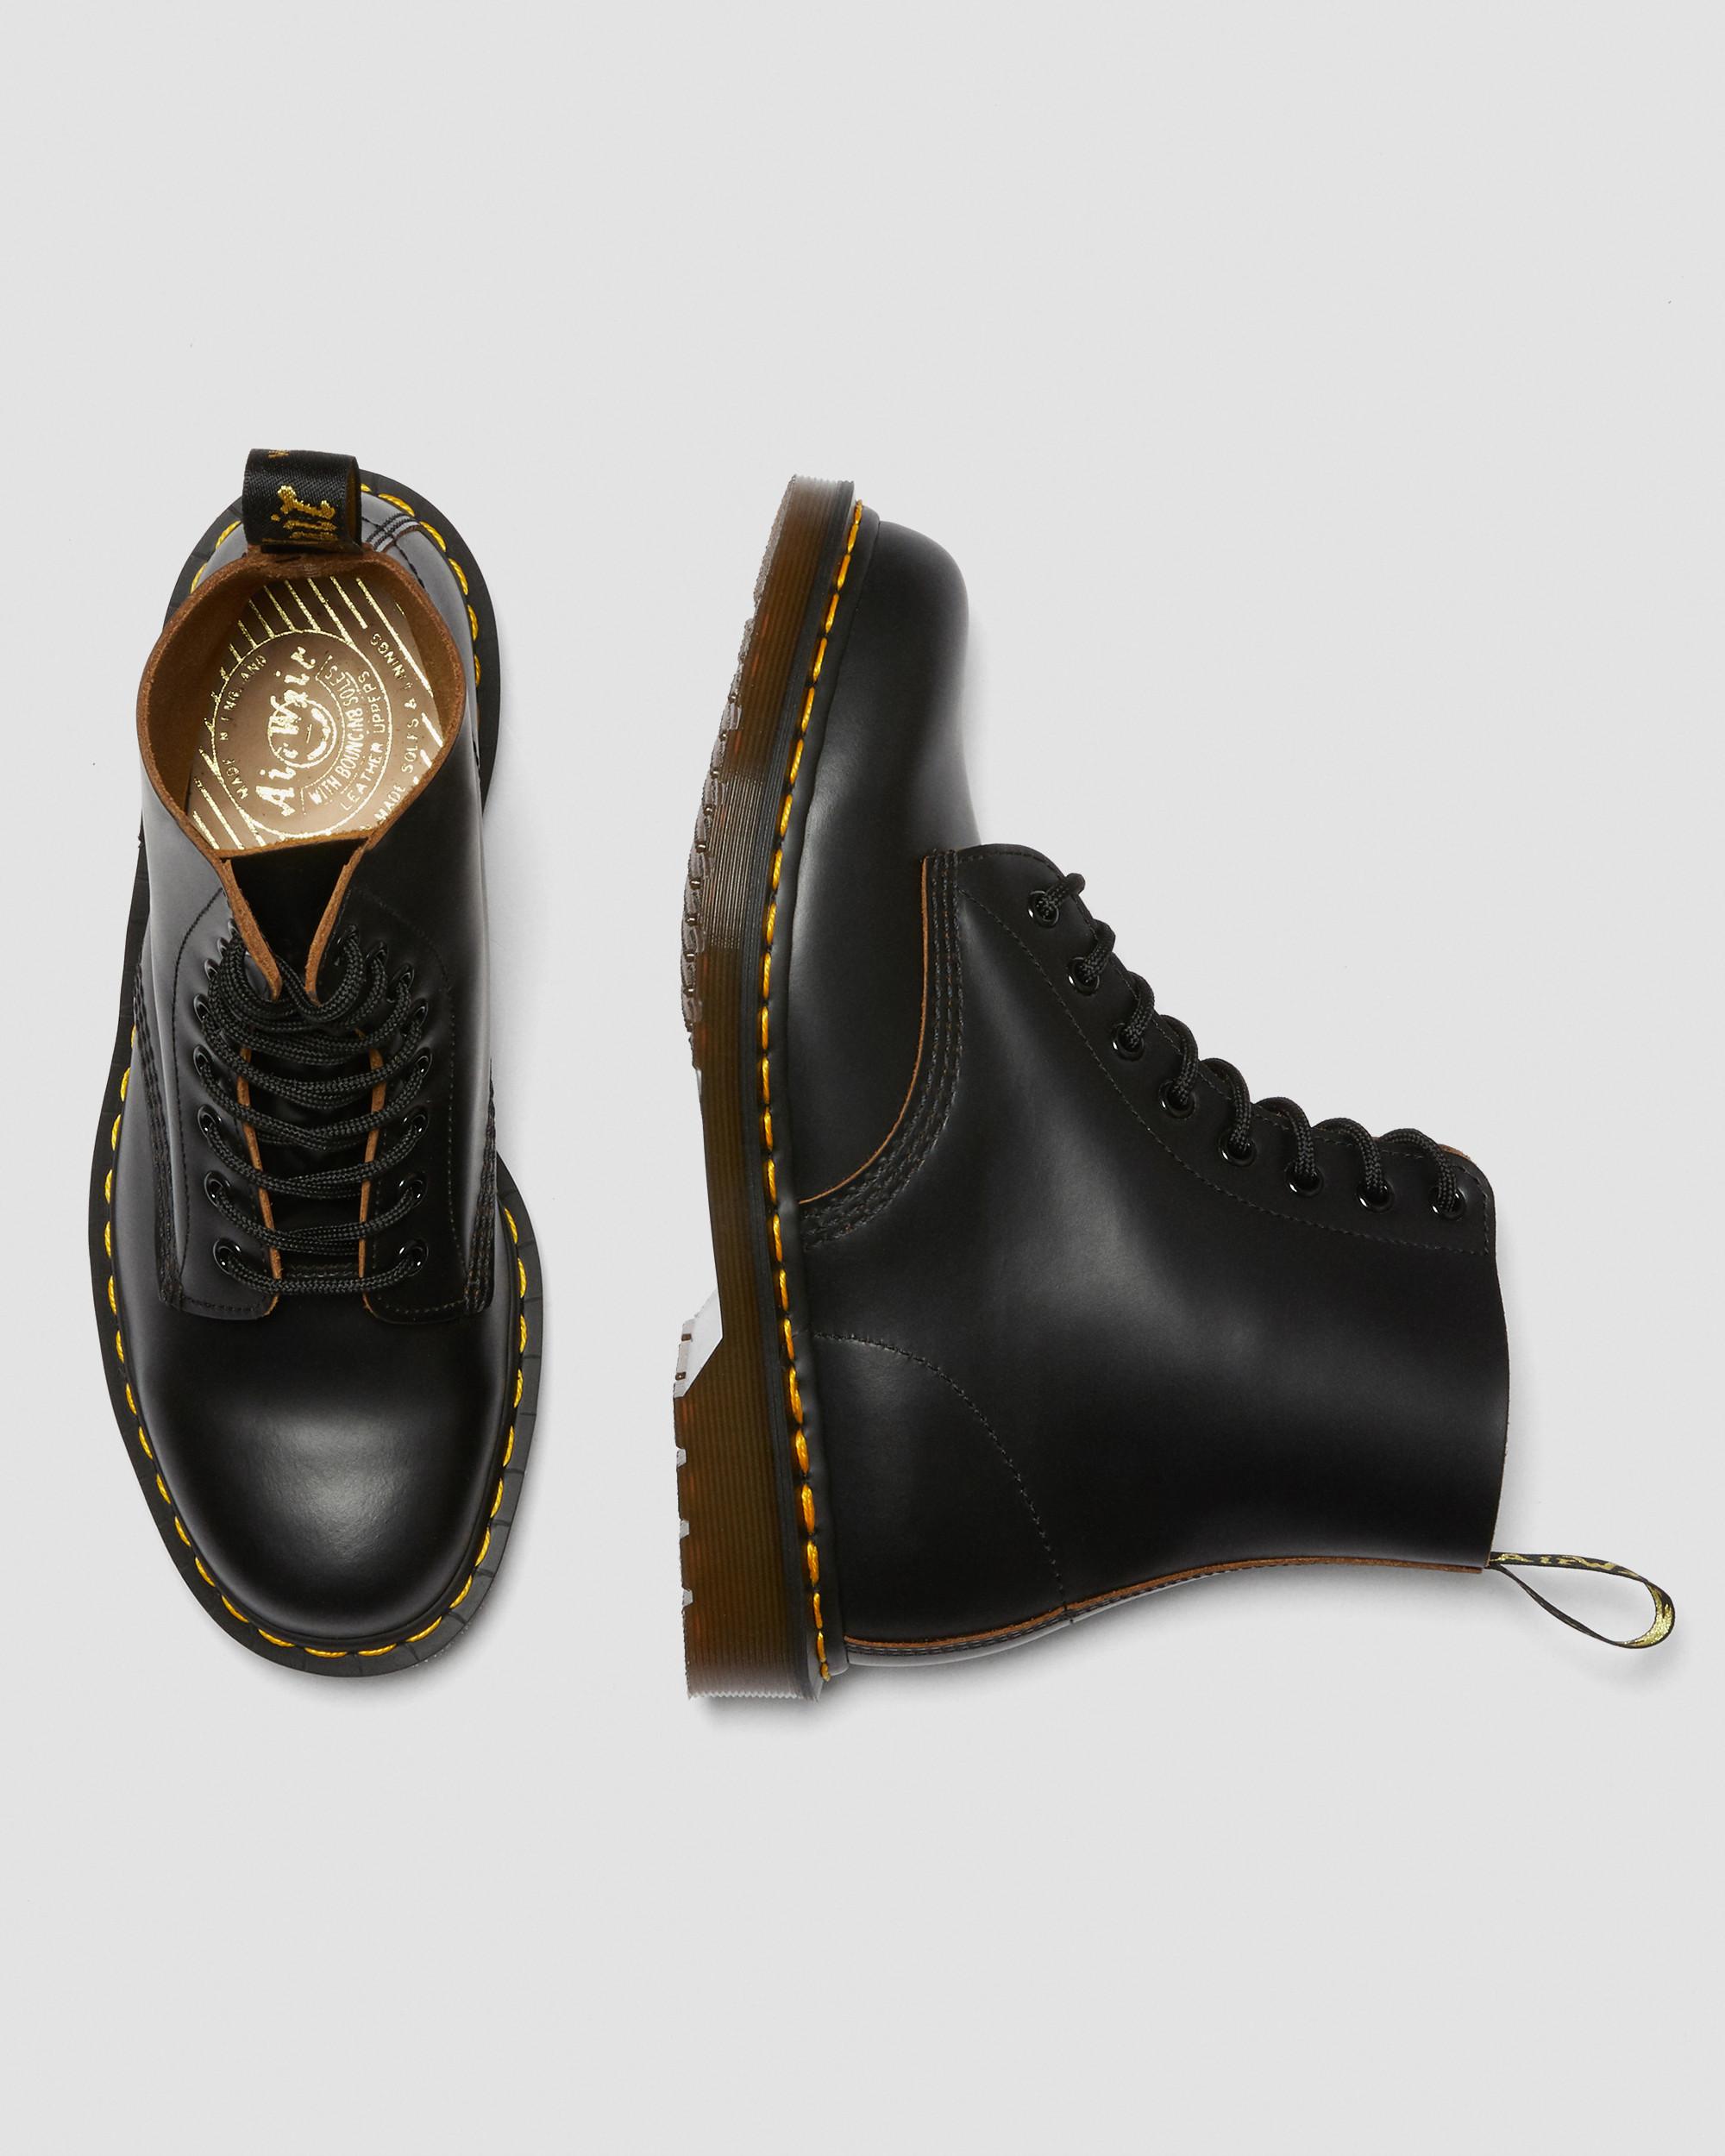 1460 Vintage Made in England Lace Up Boots in Black | Dr. Martens